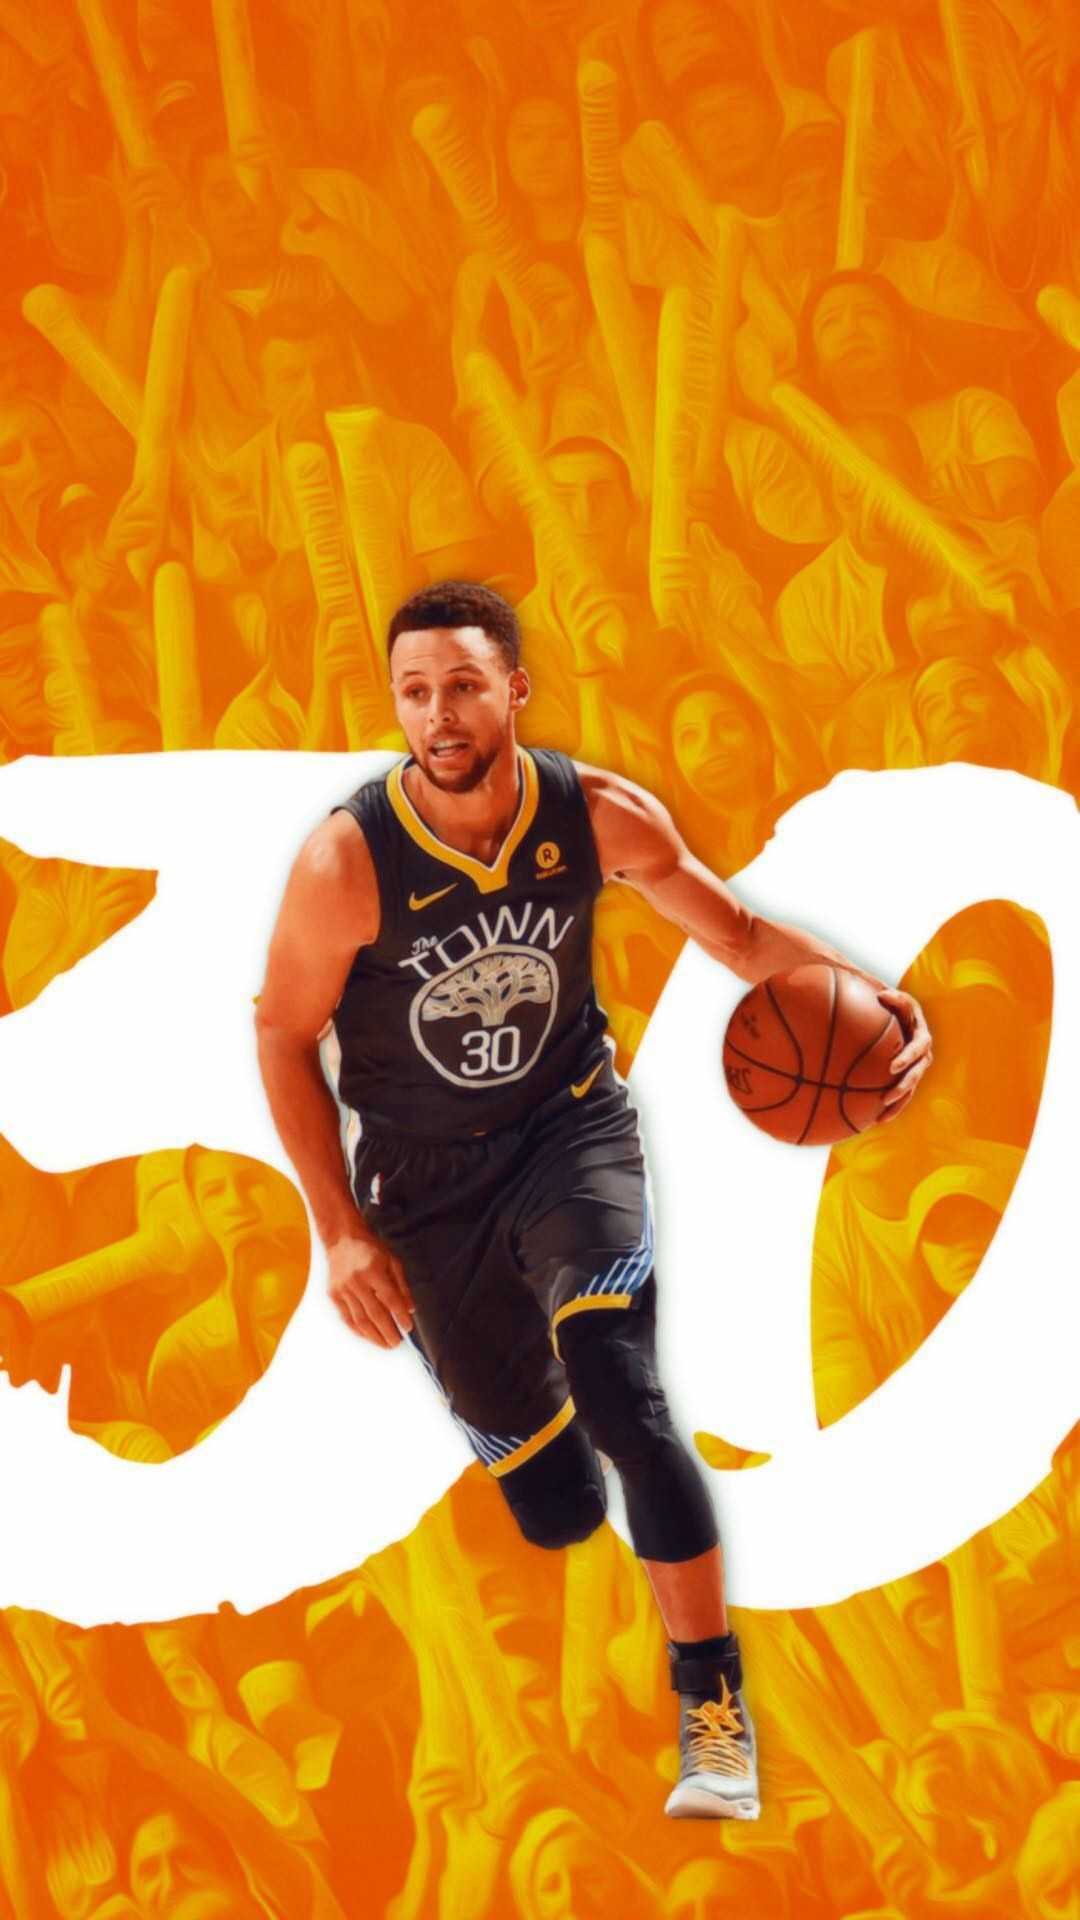 Download Stephen Curry - A Basketball Phenom Wallpaper